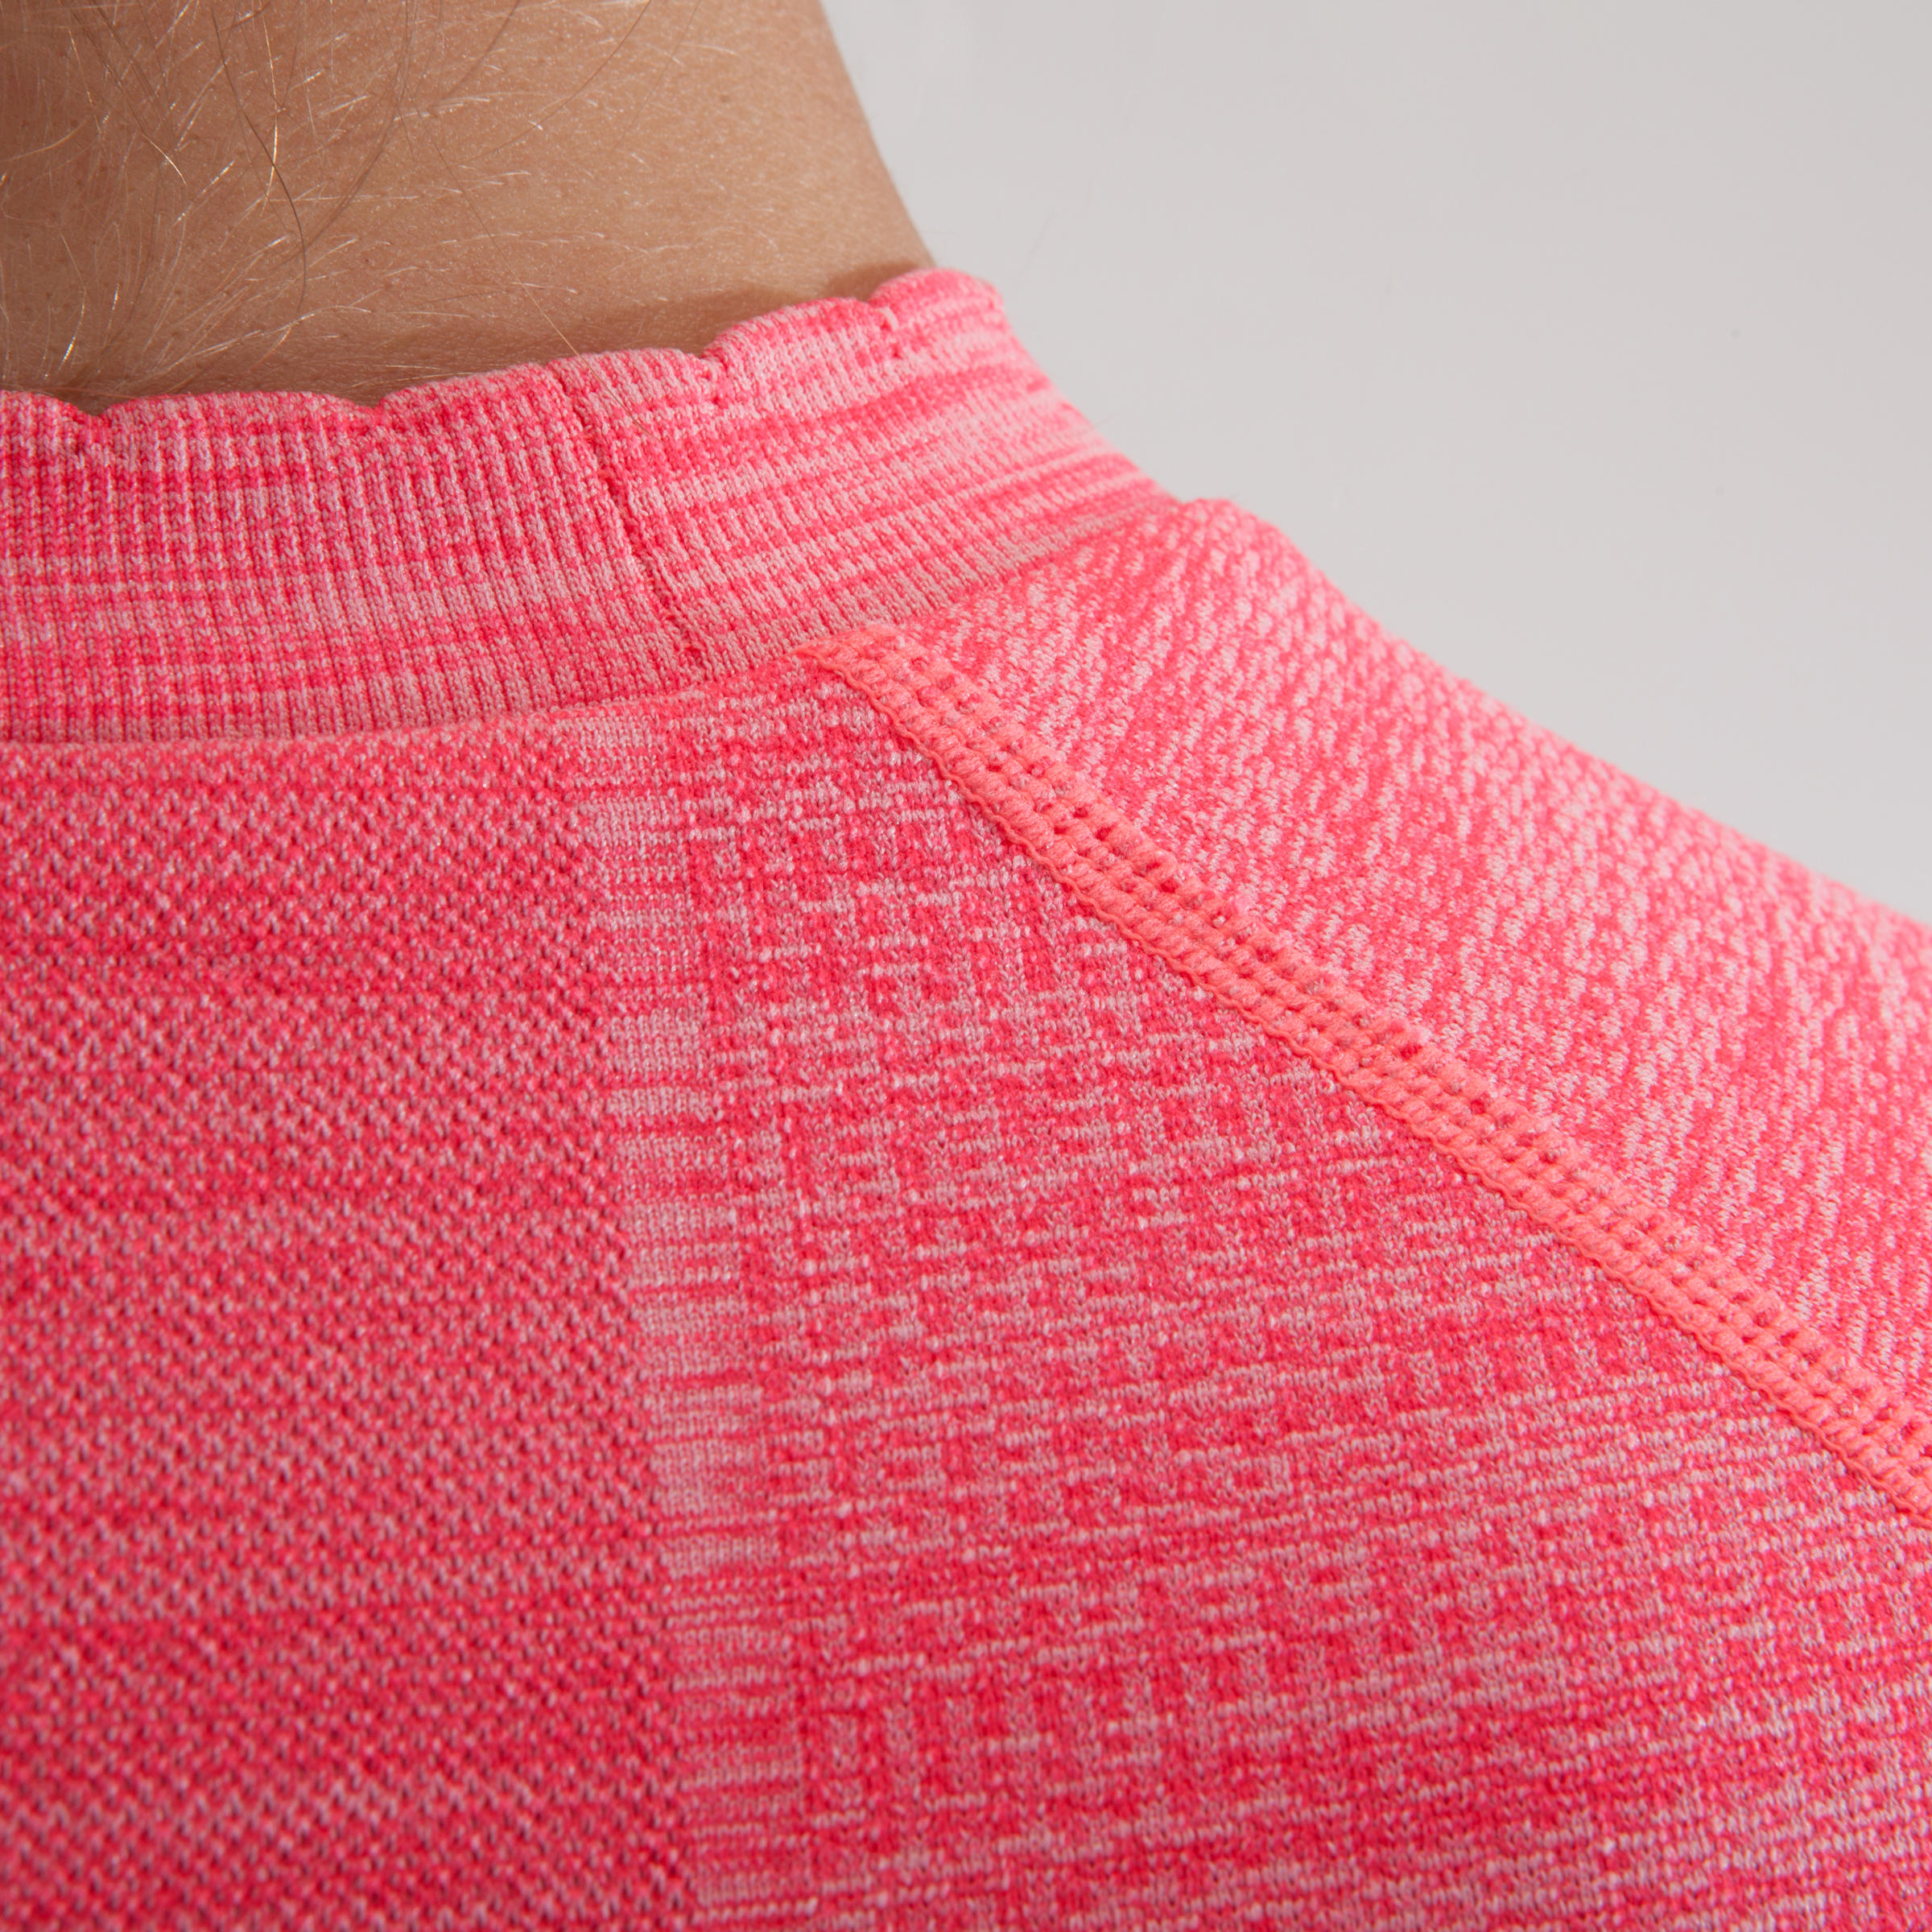 500 Women's Long-Sleeved Cycling Base Layer - Pink 12/12